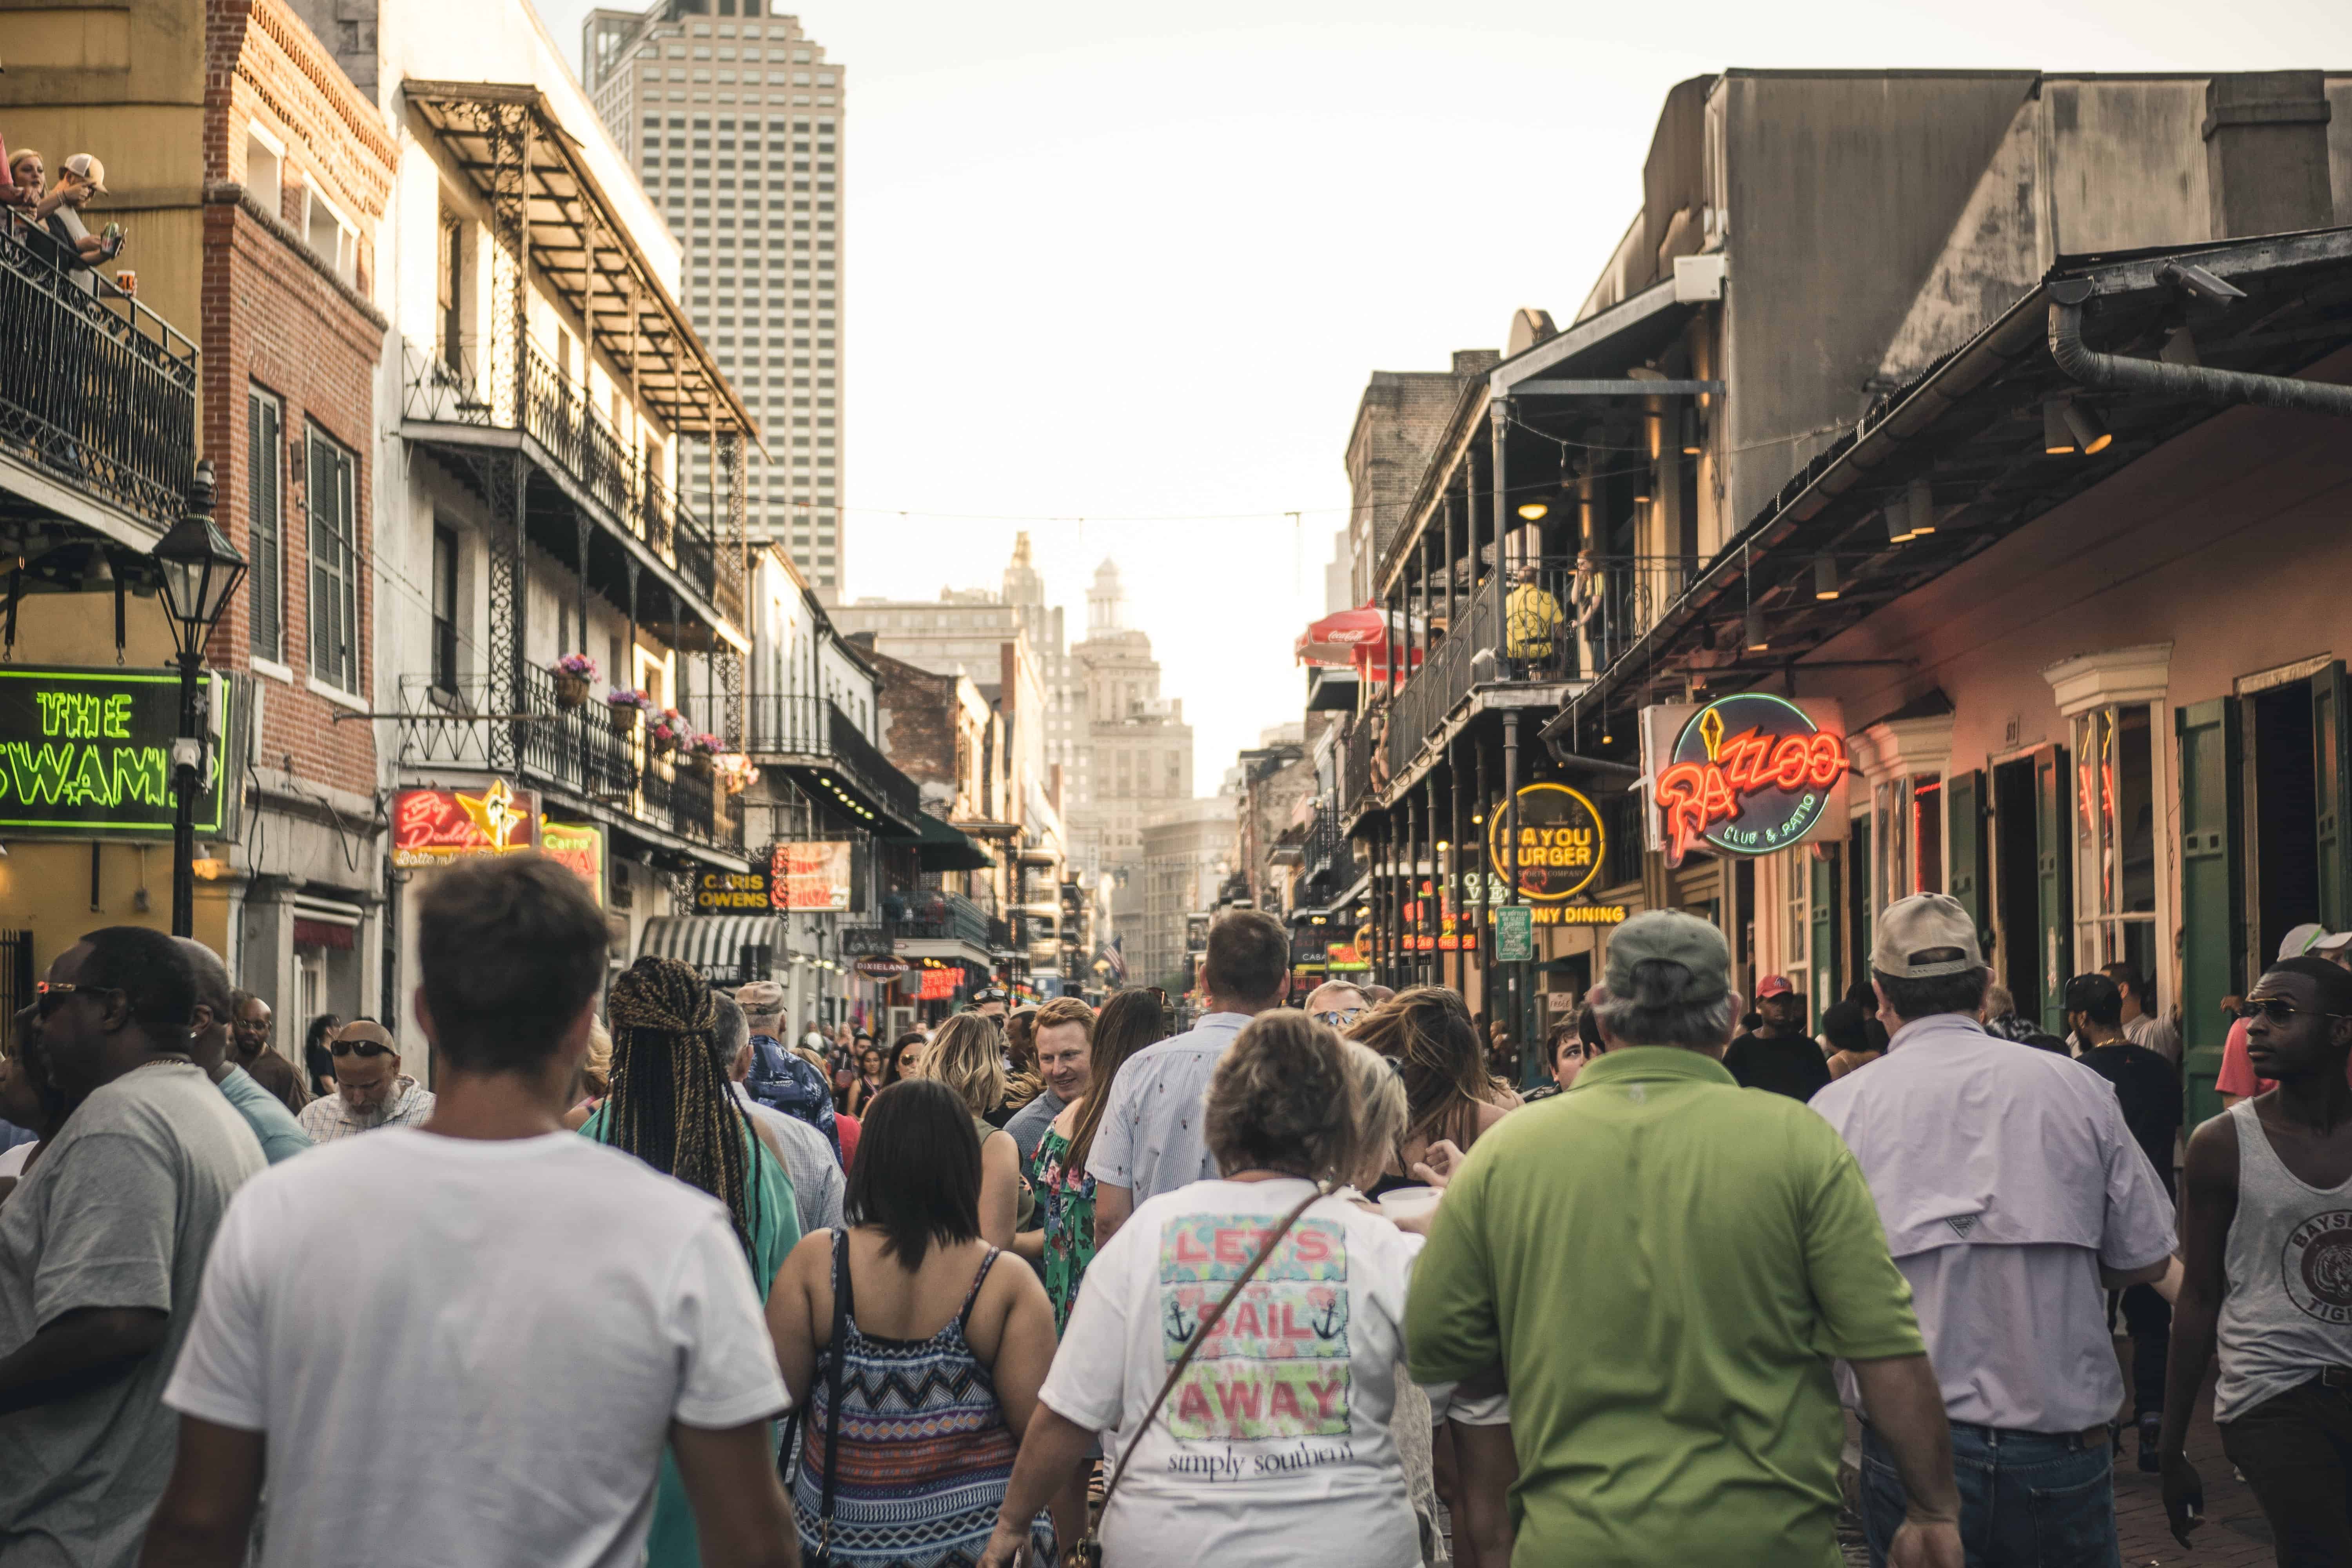 New-Orleans-City-Tour-By-Mini-Bus-With-Southern-Style-Tours